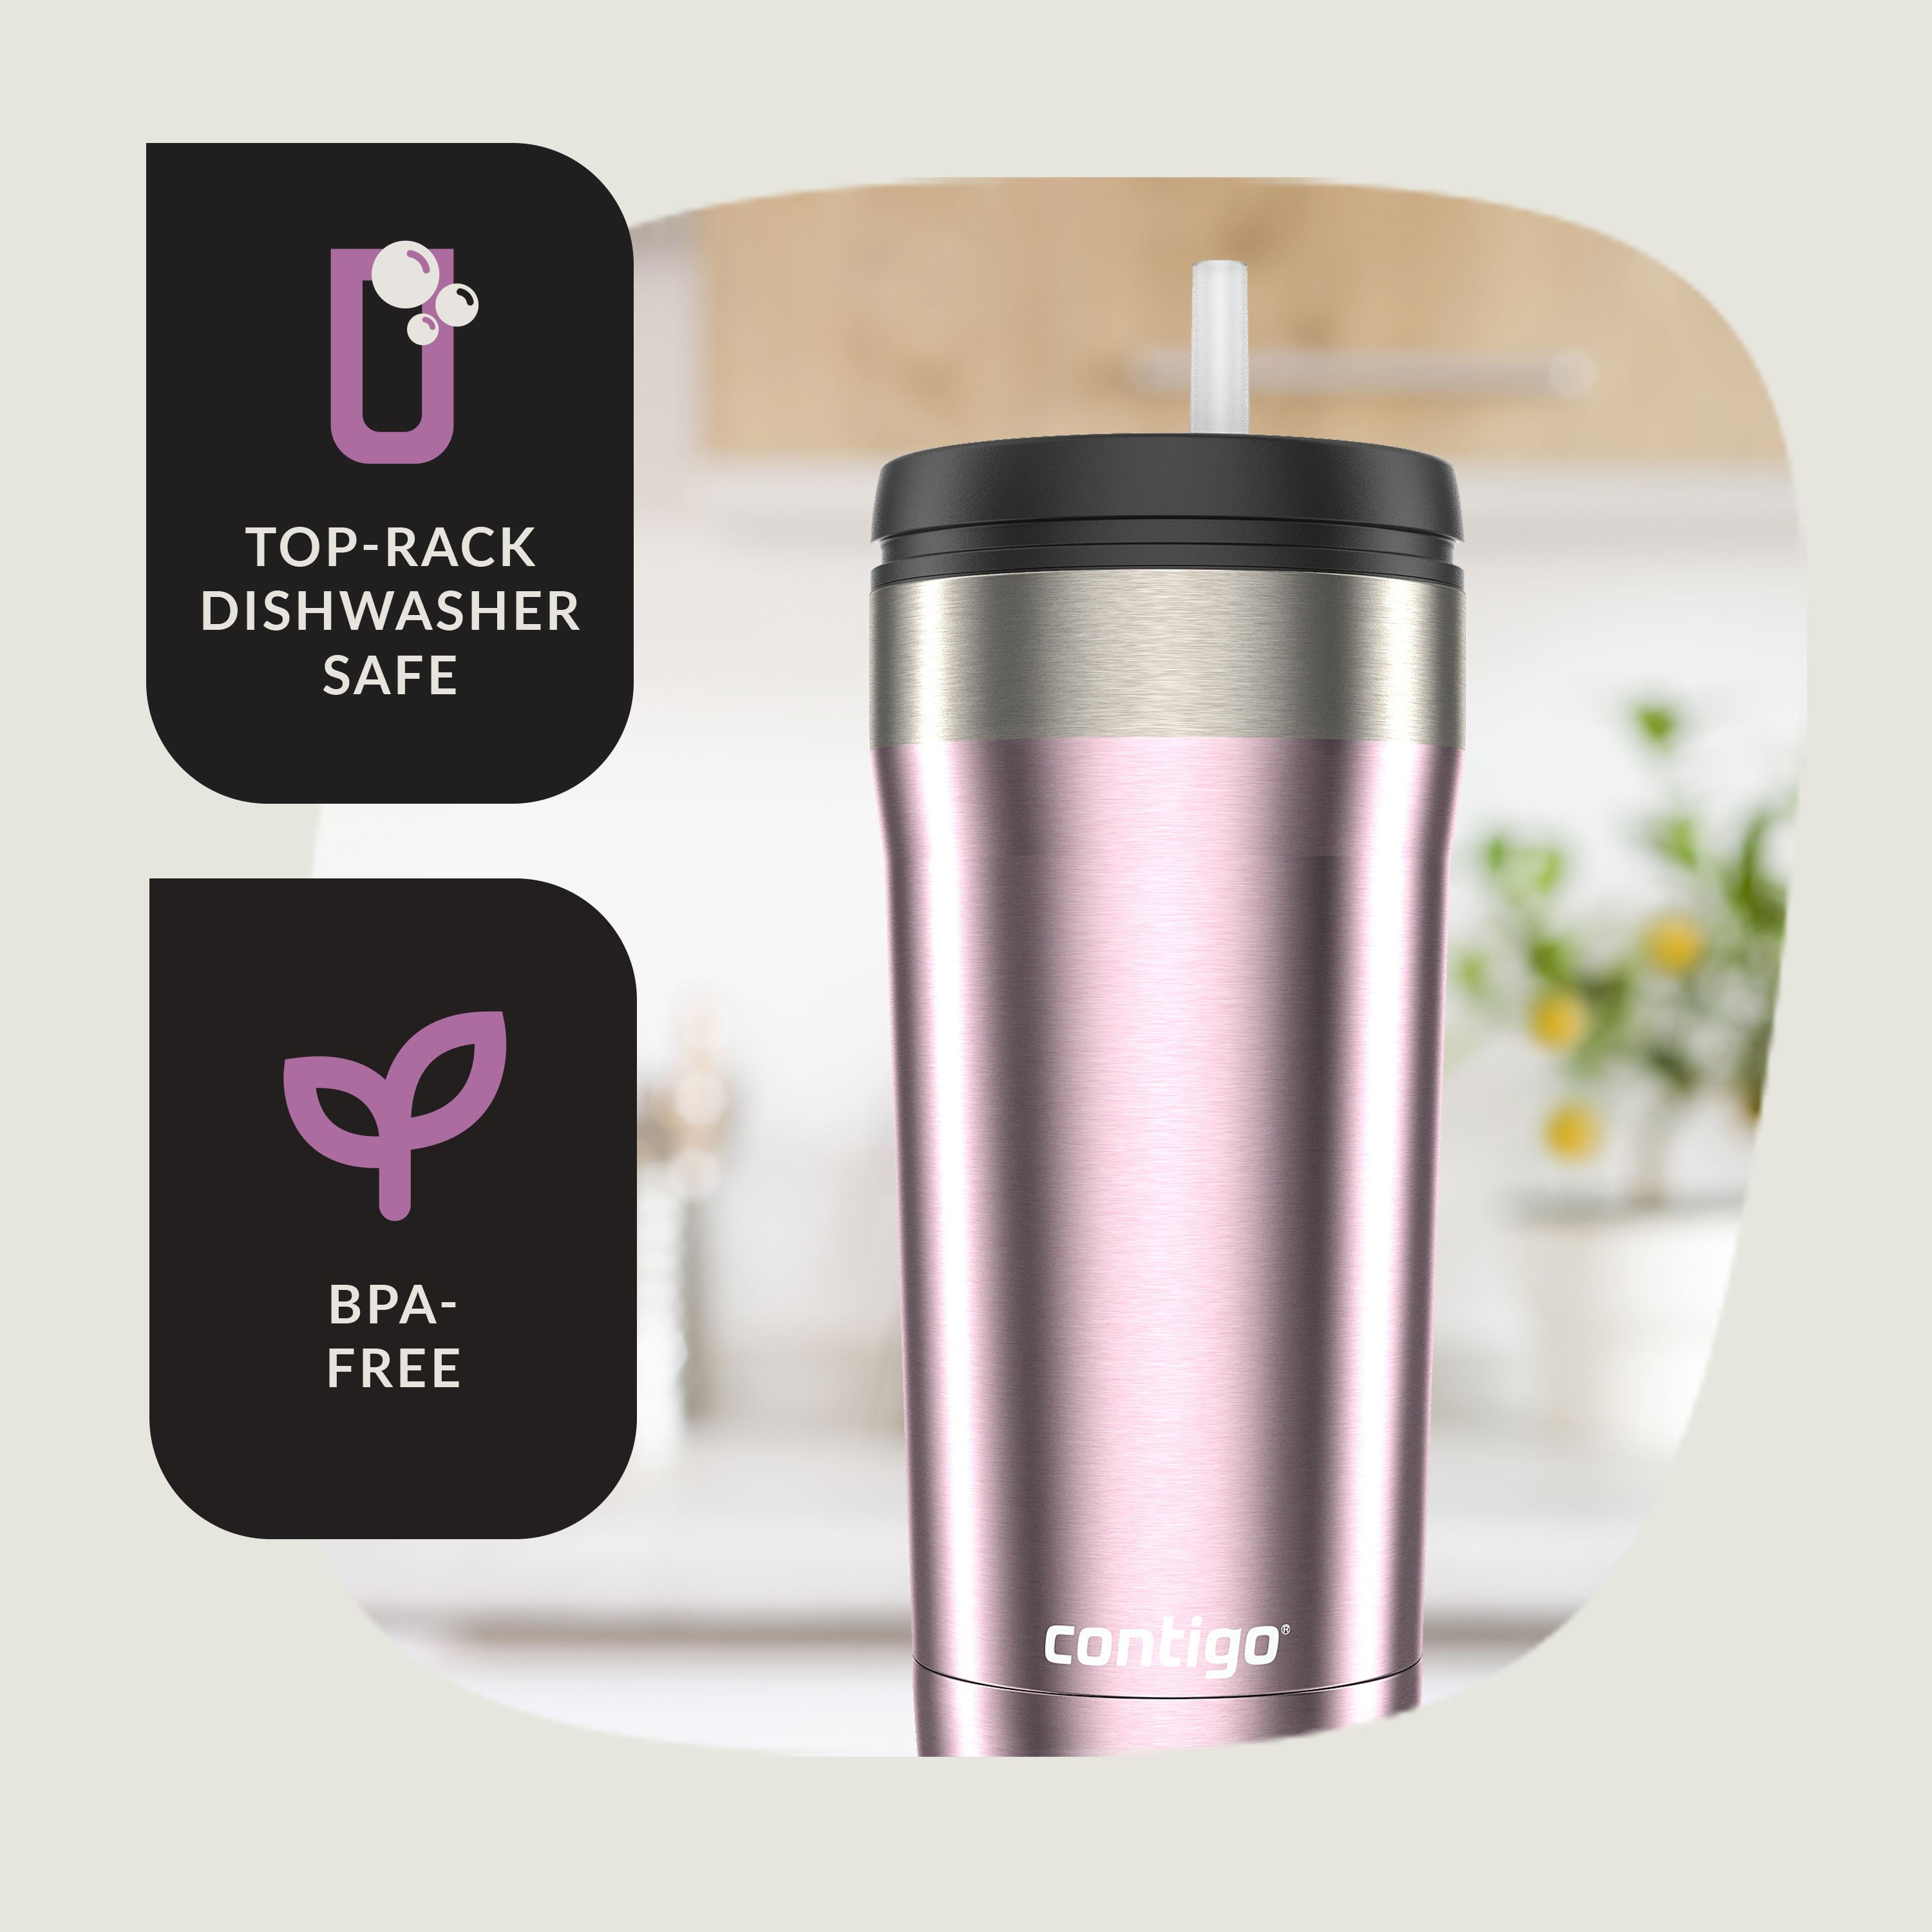 Contigo Uptown Dual-Sip Stainless Steel Tumbler with Straw in Pink, 18 fl  oz. 